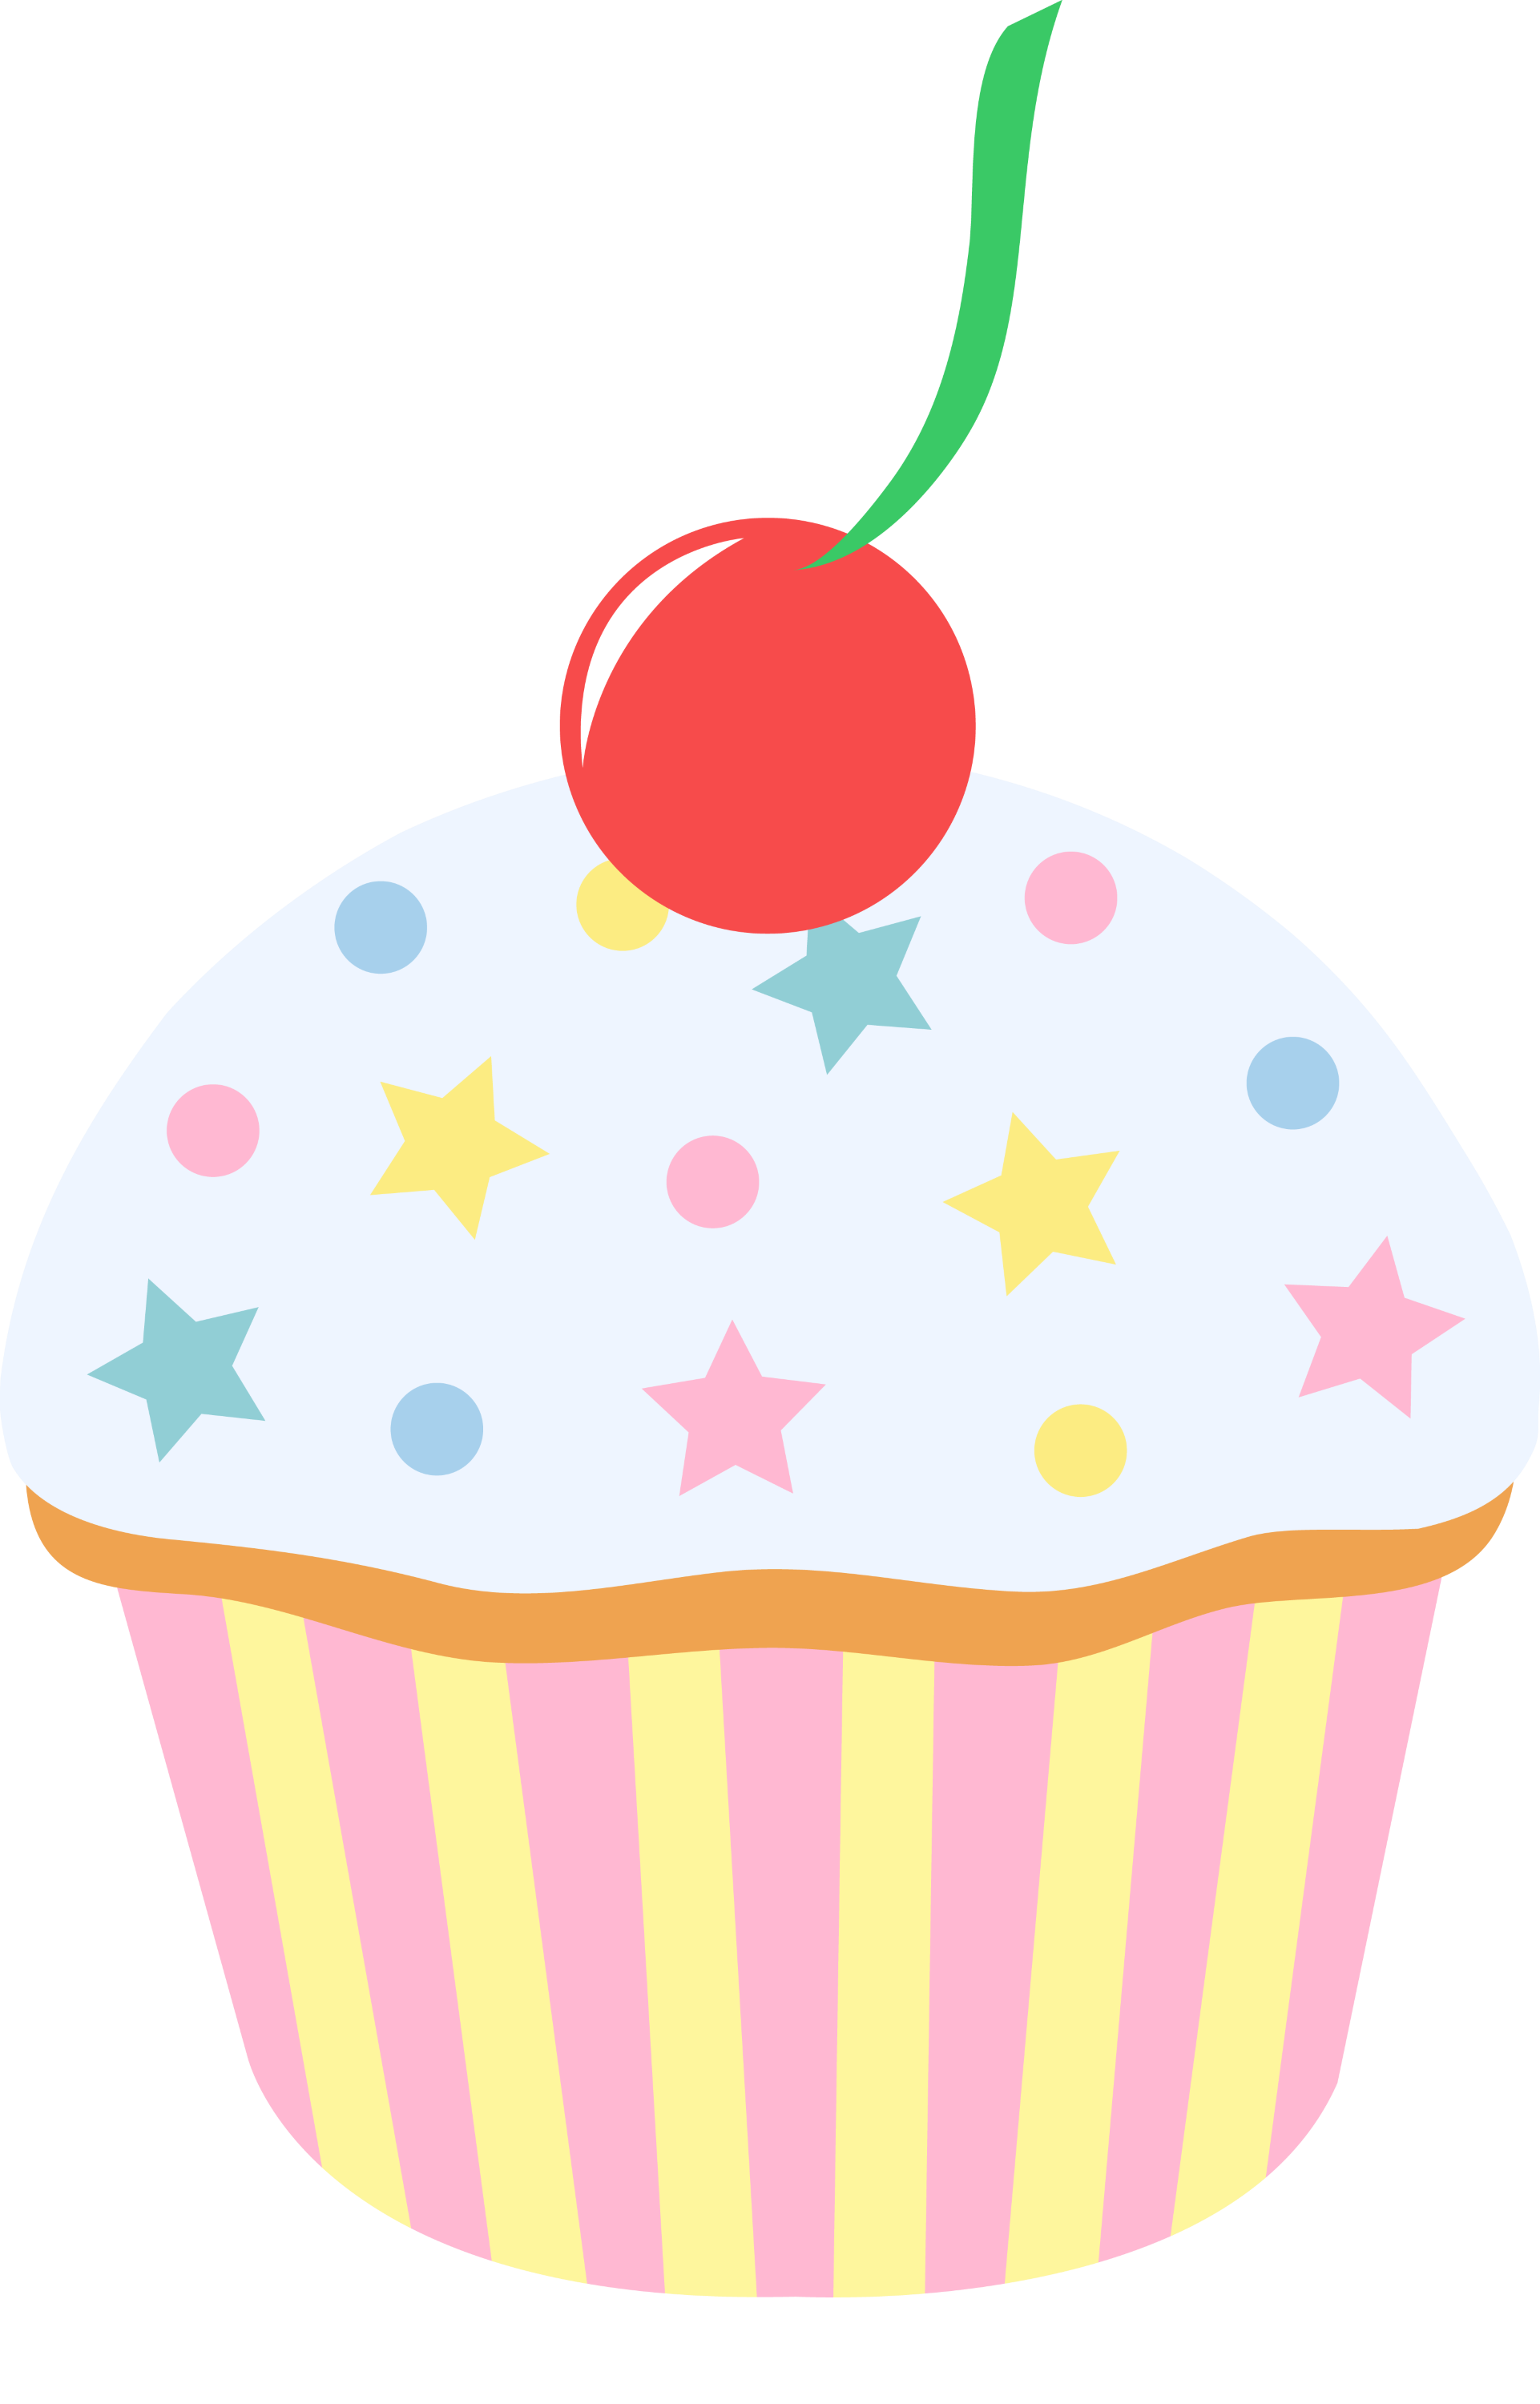 clipart pics of cupcakes - photo #33